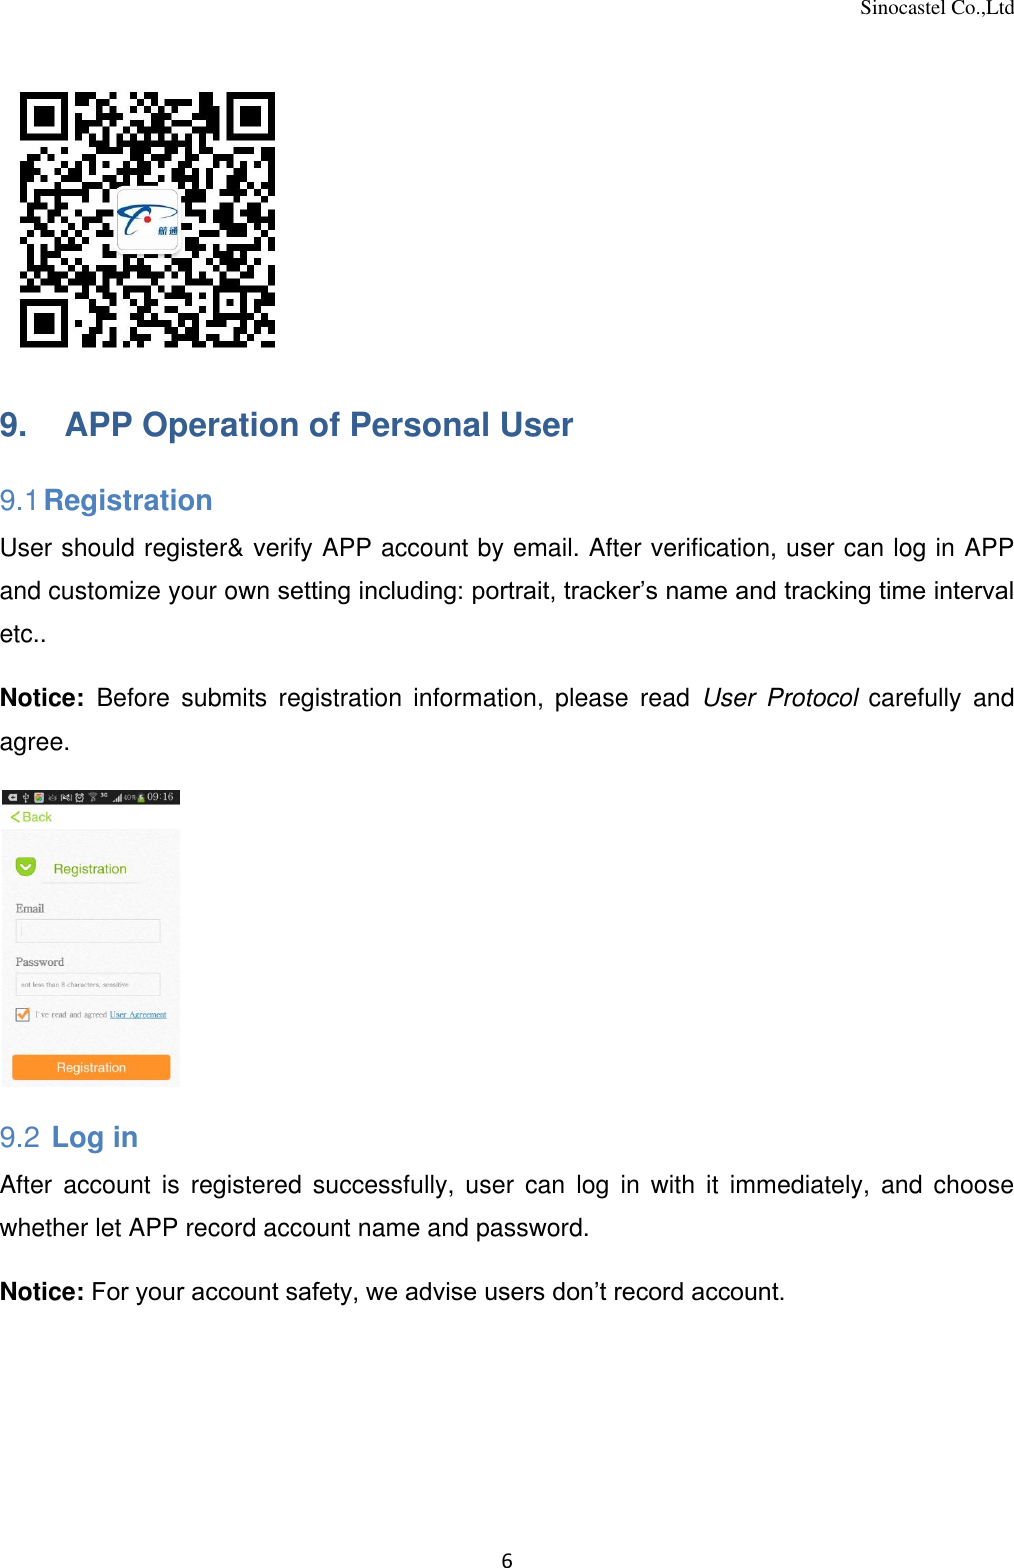 Sinocastel Co.,Ltd 6   9.    APP Operation of Personal User 9.1 Registration User should register&amp; verify APP account by email. After verification, user can log in APP and customize your own setting including: portrait, tracker’s name and tracking time interval etc..  Notice:  Before  submits  registration  information,  please  read  User  Protocol  carefully  and agree.  9.2  Log in After  account  is  registered  successfully,  user  can  log  in  with  it  immediately,  and  choose whether let APP record account name and password.    Notice: For your account safety, we advise users don’t record account. 